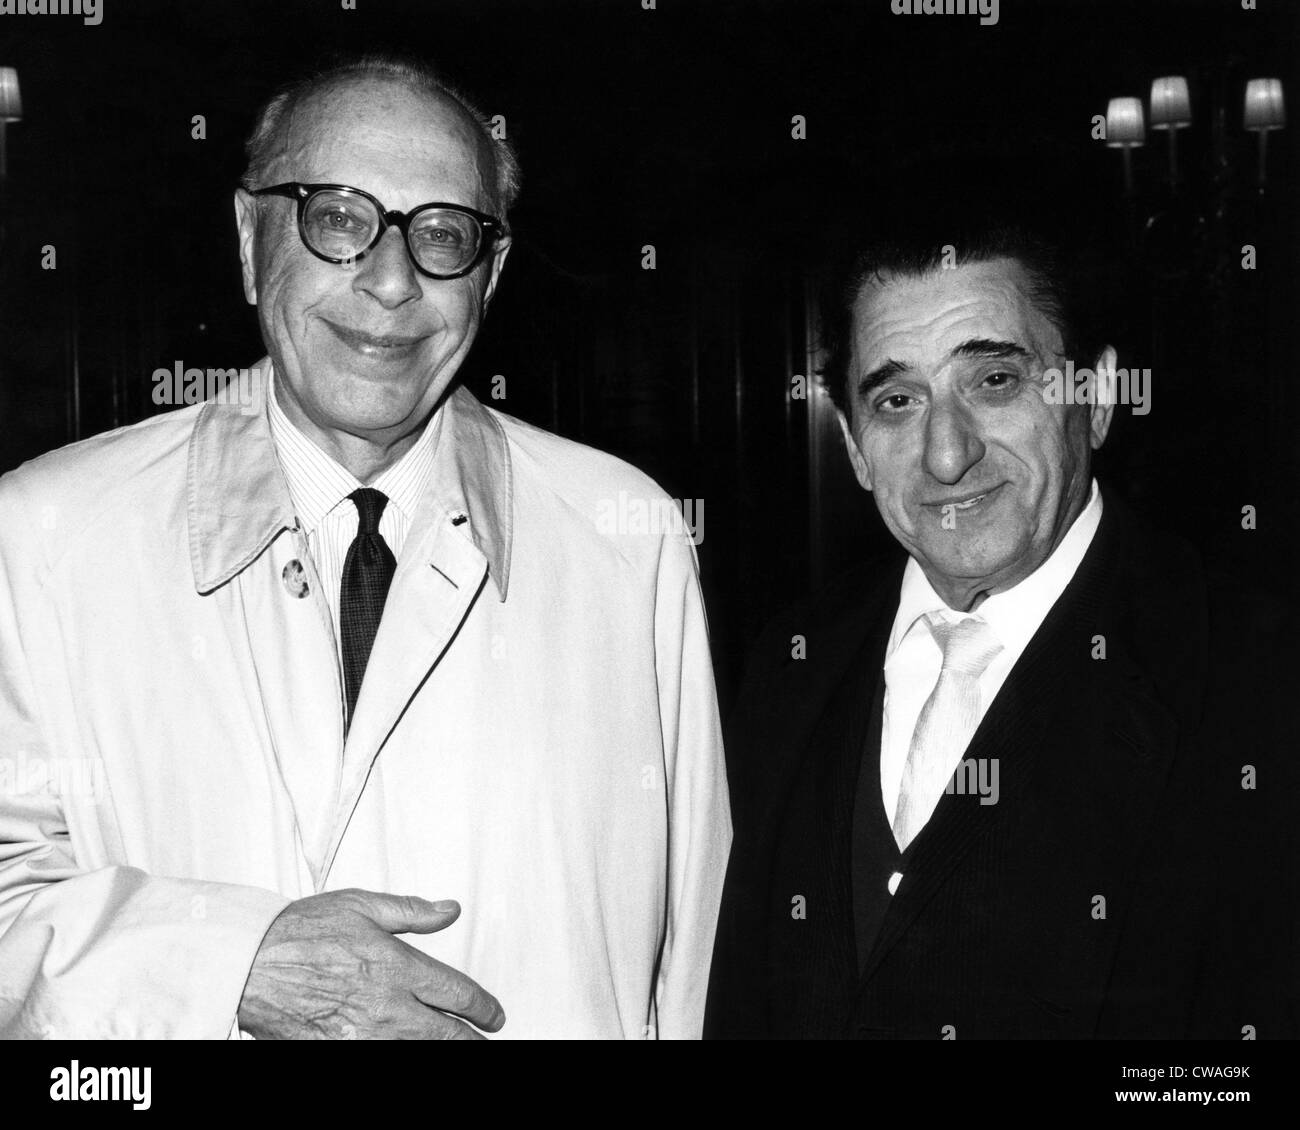 Cleveland Orchestra music director George Szell (left), opera tenor Jan Peerce (right), meeting in Vienna, Austria, 1965.. Stock Photo